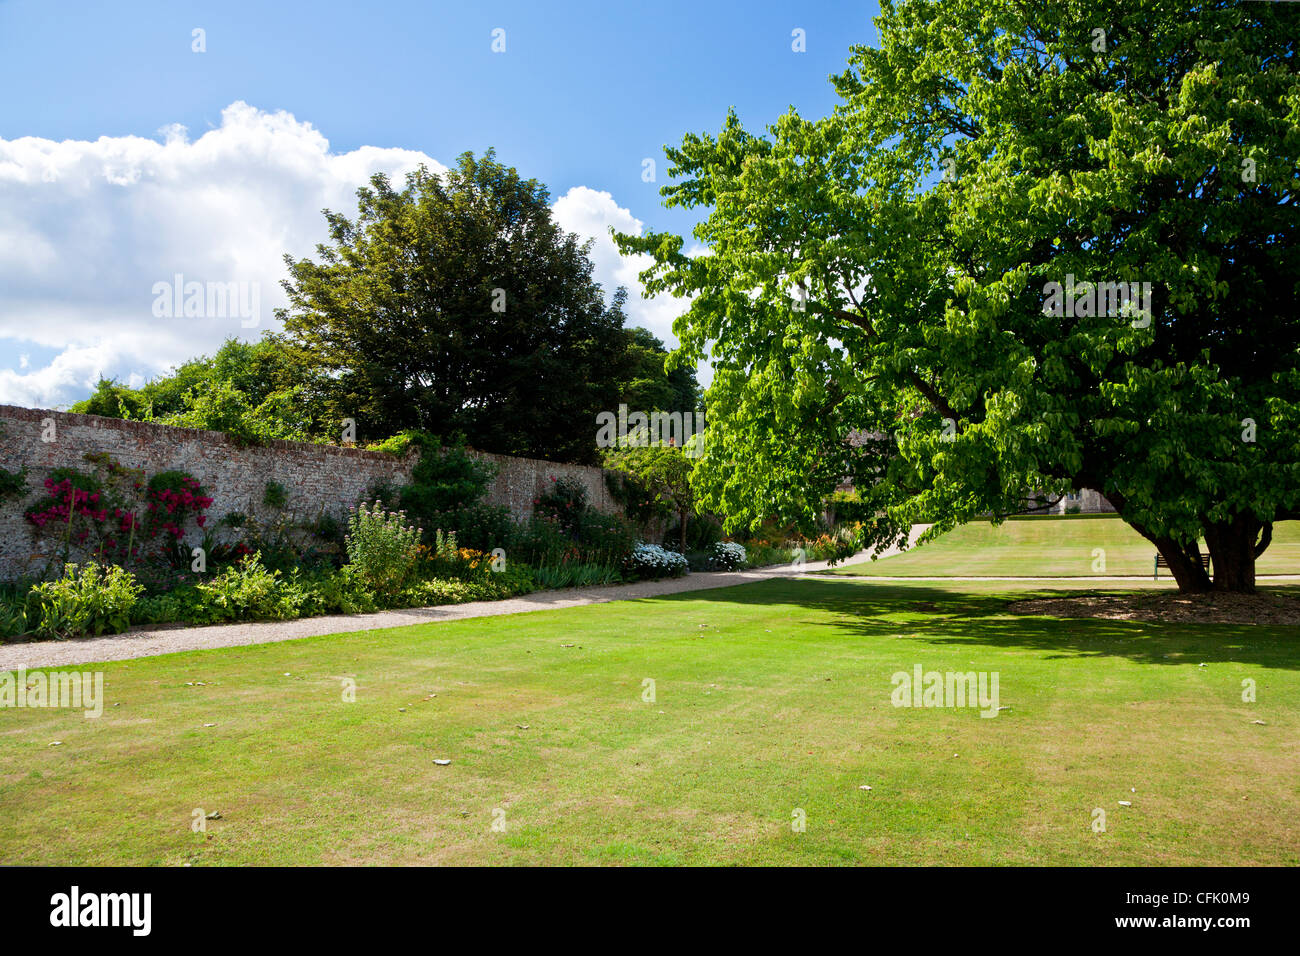 Lawn and walled garden of an English country house in Berkshire, England, UK Stock Photo